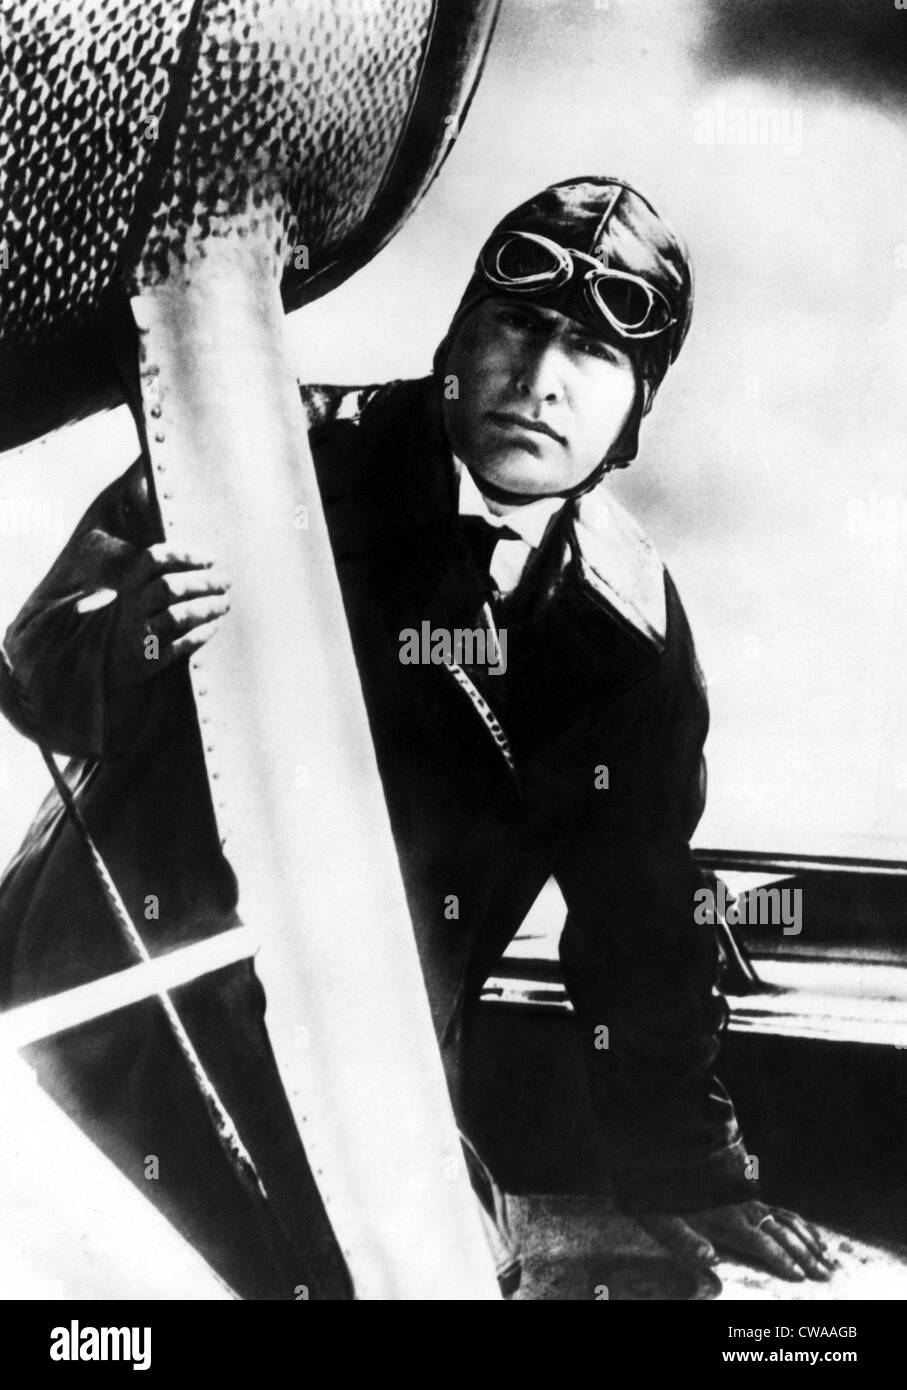 Benito Mussolini (1883-1945), Prime Minister and dictator of Italy from 1922-1943 piloting his tri-motored plane, October 24, Stock Photo